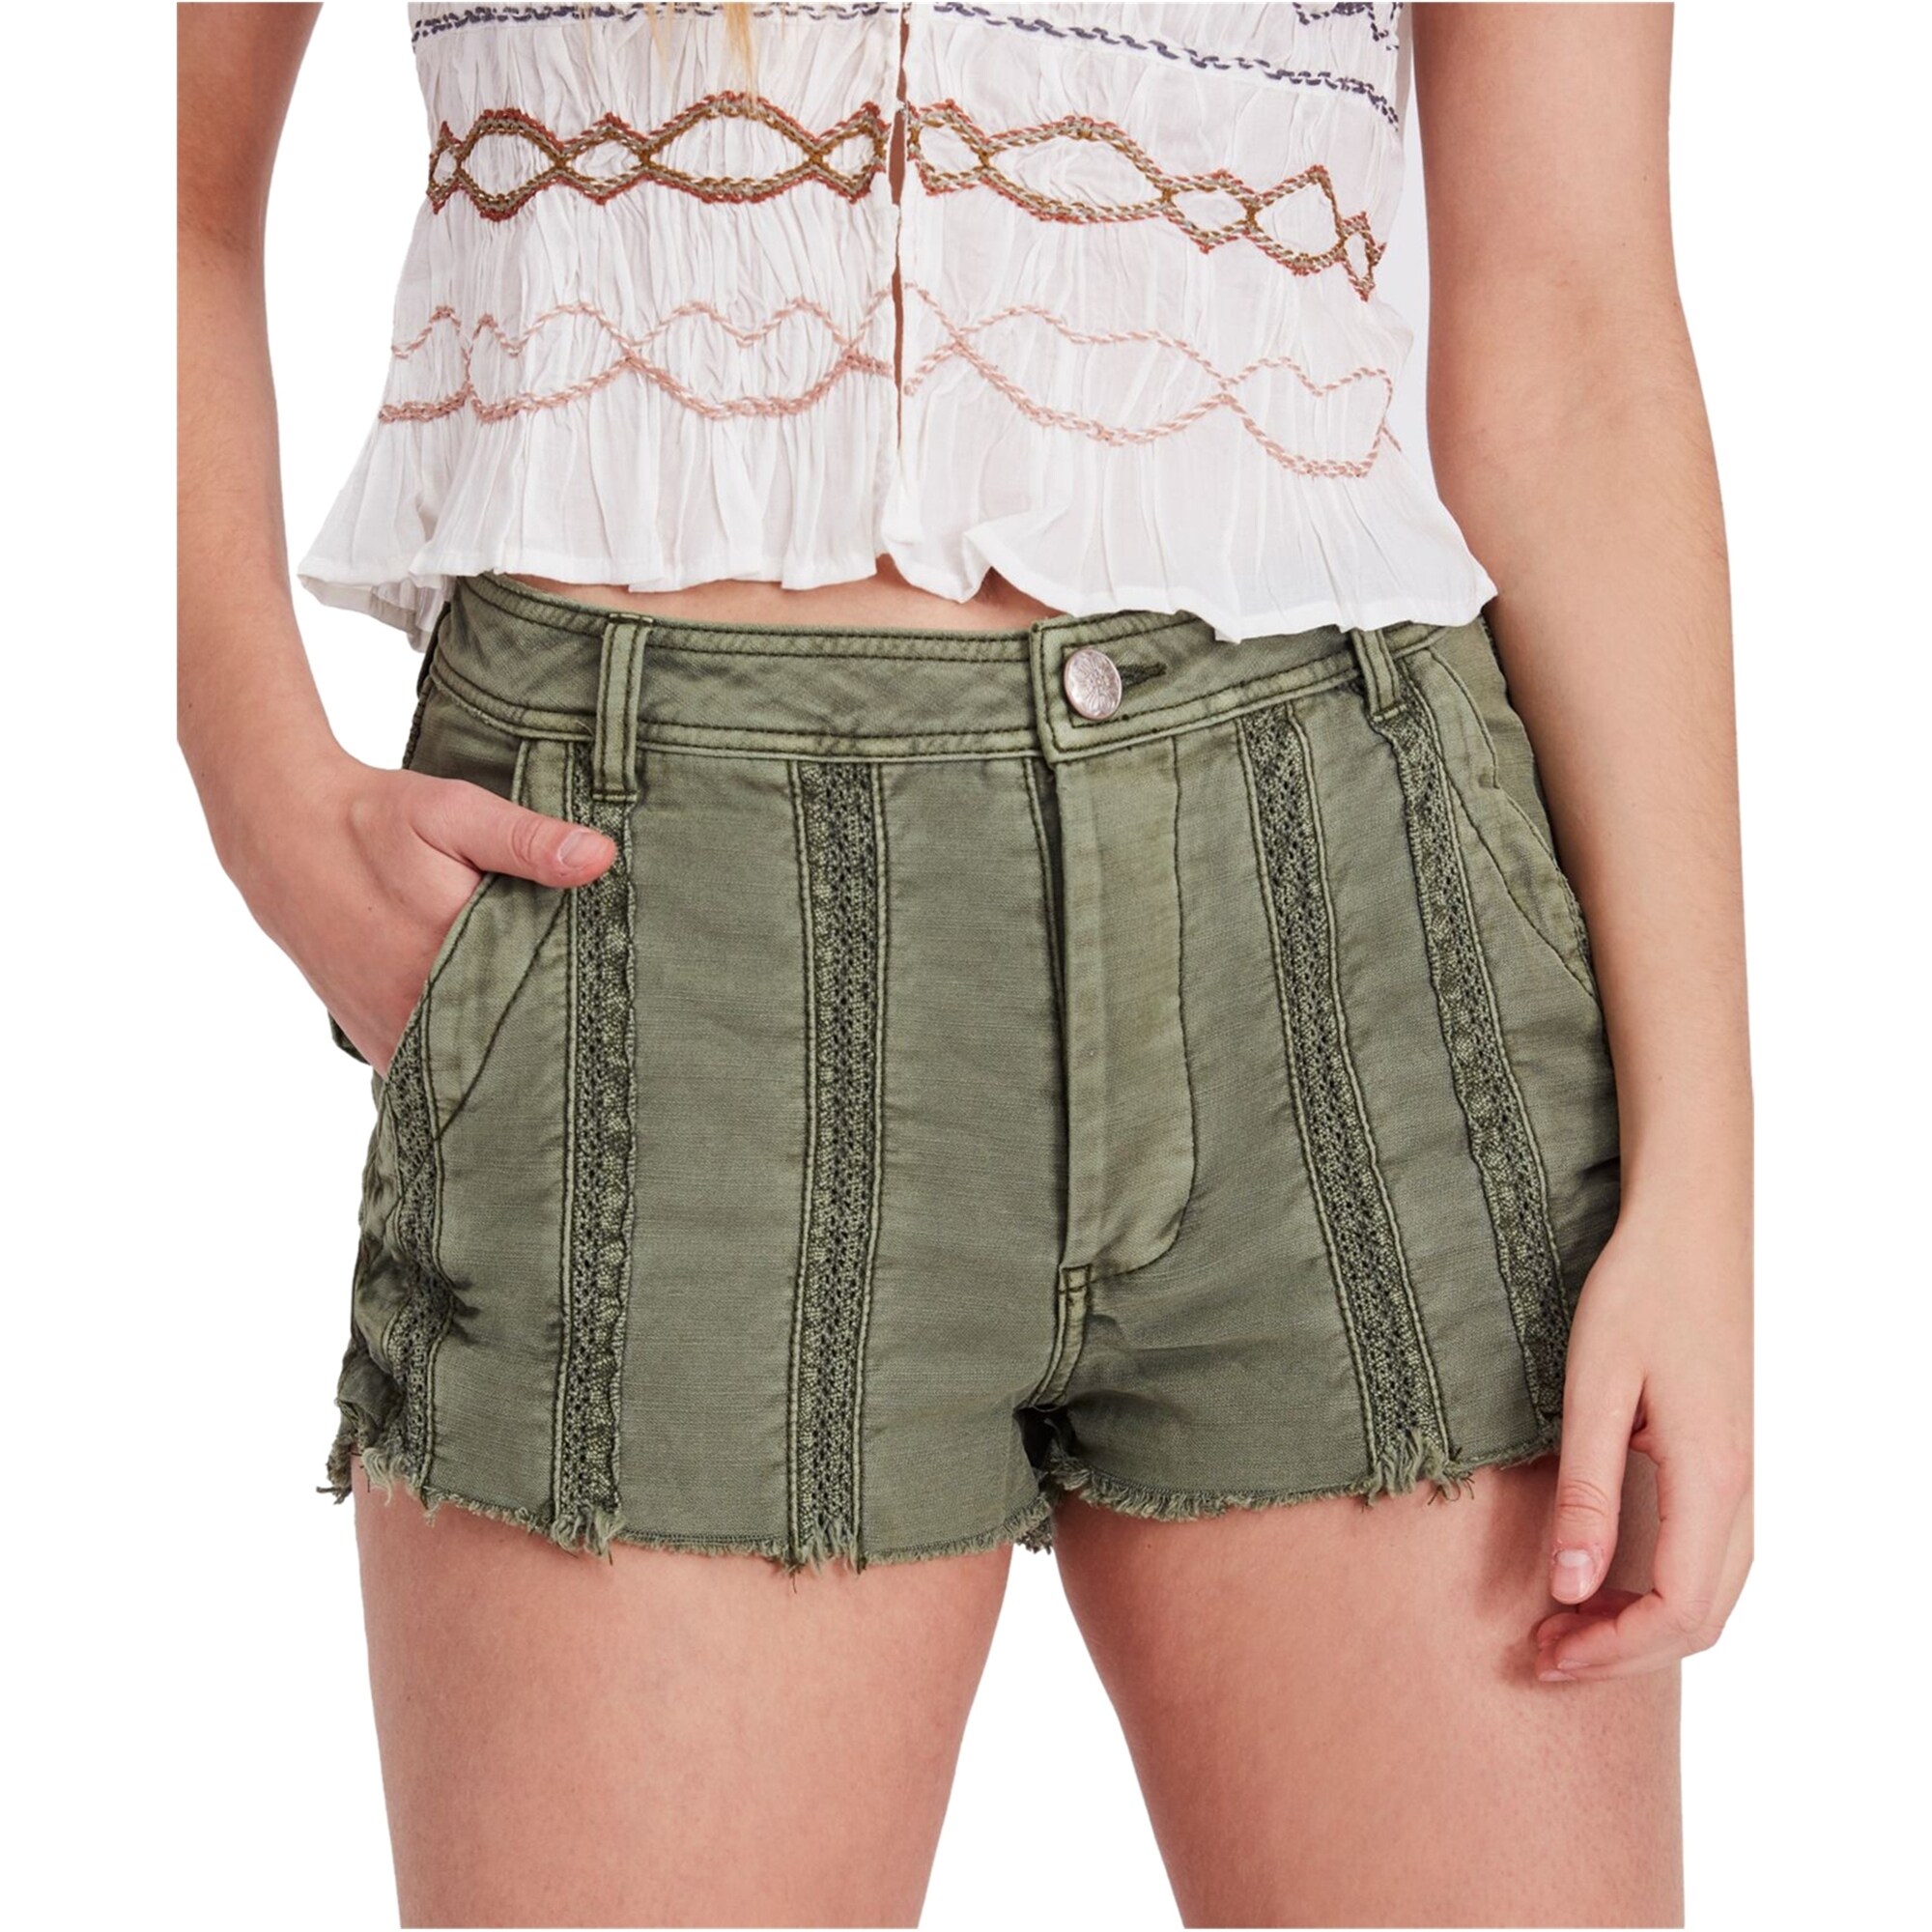 shorts with lace trim